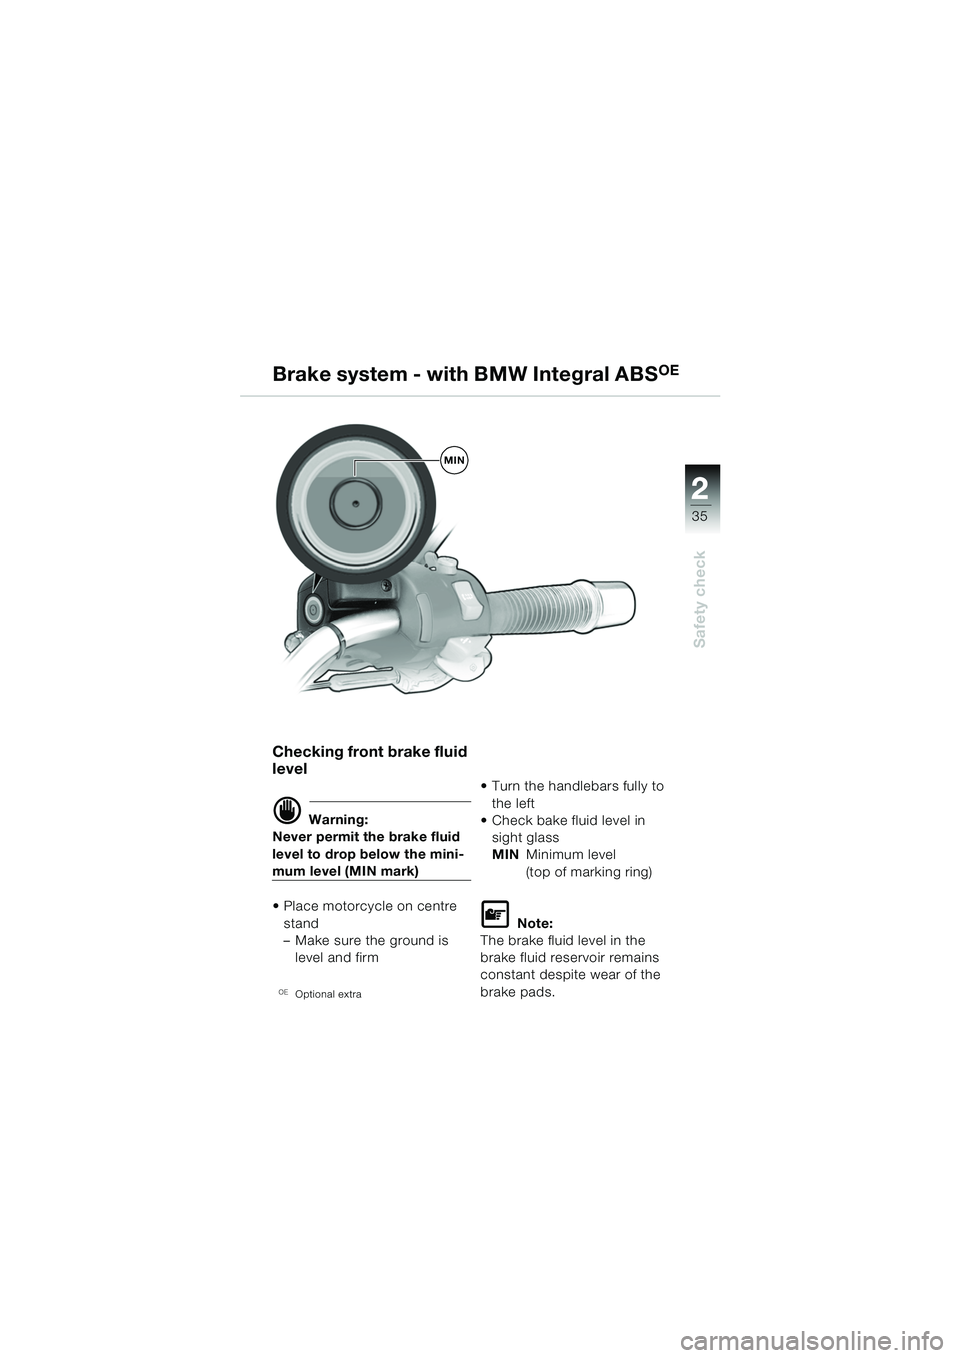 BMW MOTORRAD R 850 R 2004  Riders Manual (in English) 2
35
2
Safety check
MIN
Brake system - with BMW Integral ABSOE
Checking front brake fluid 
level
d Warning:
Never permit the brake fluid 
level to drop below the mini-
mum level (MIN mark)
 Place mot